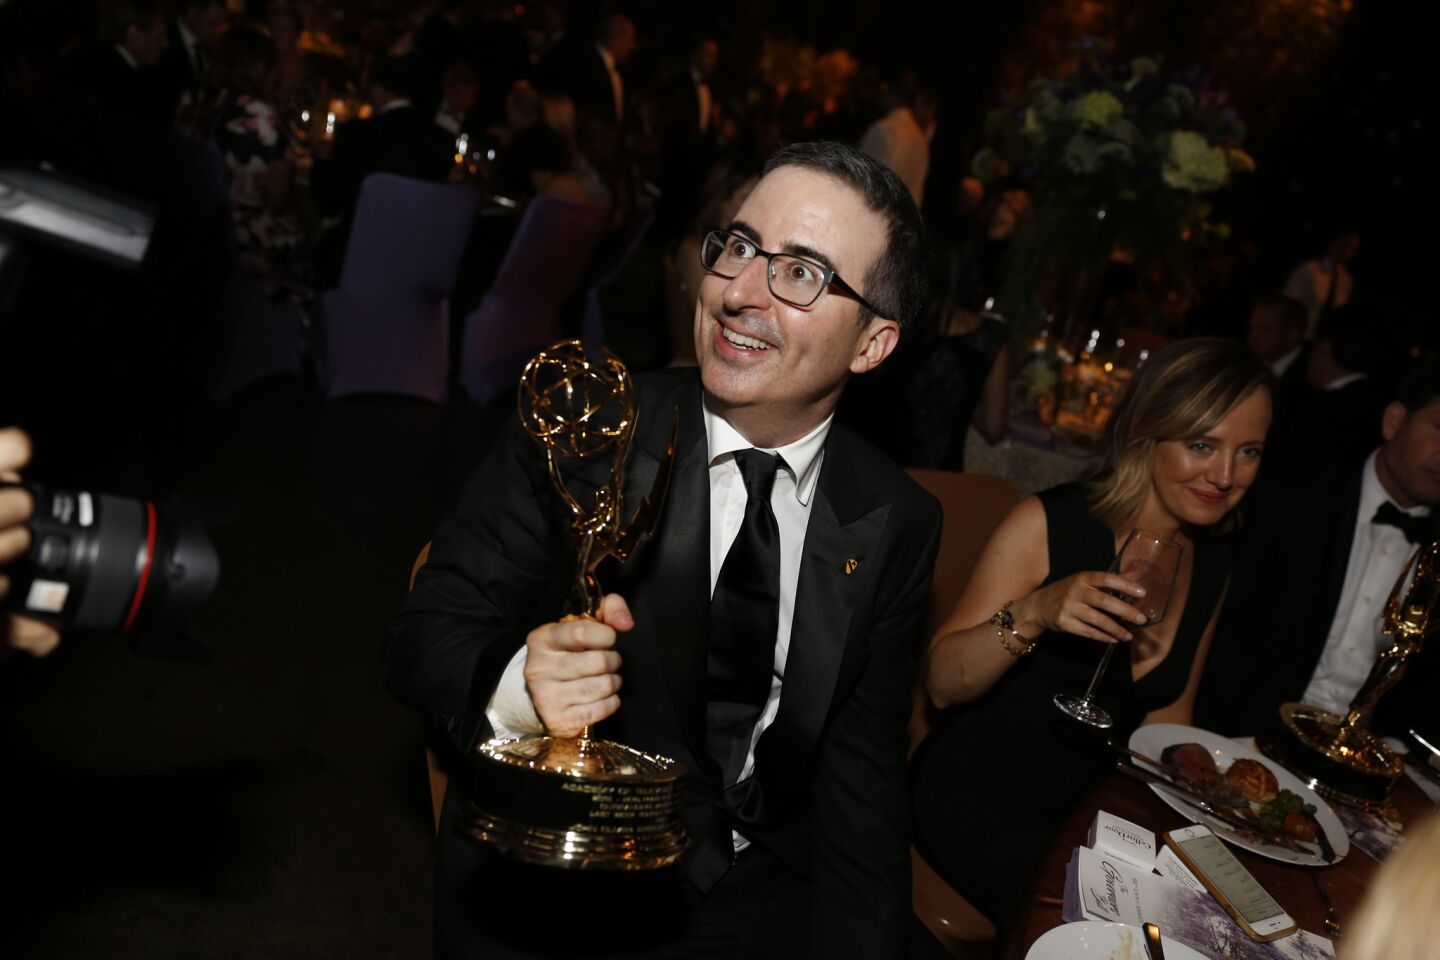 Emmy winner John Oliver at the Governors Ball after the 68th Primetime Emmy Awards.